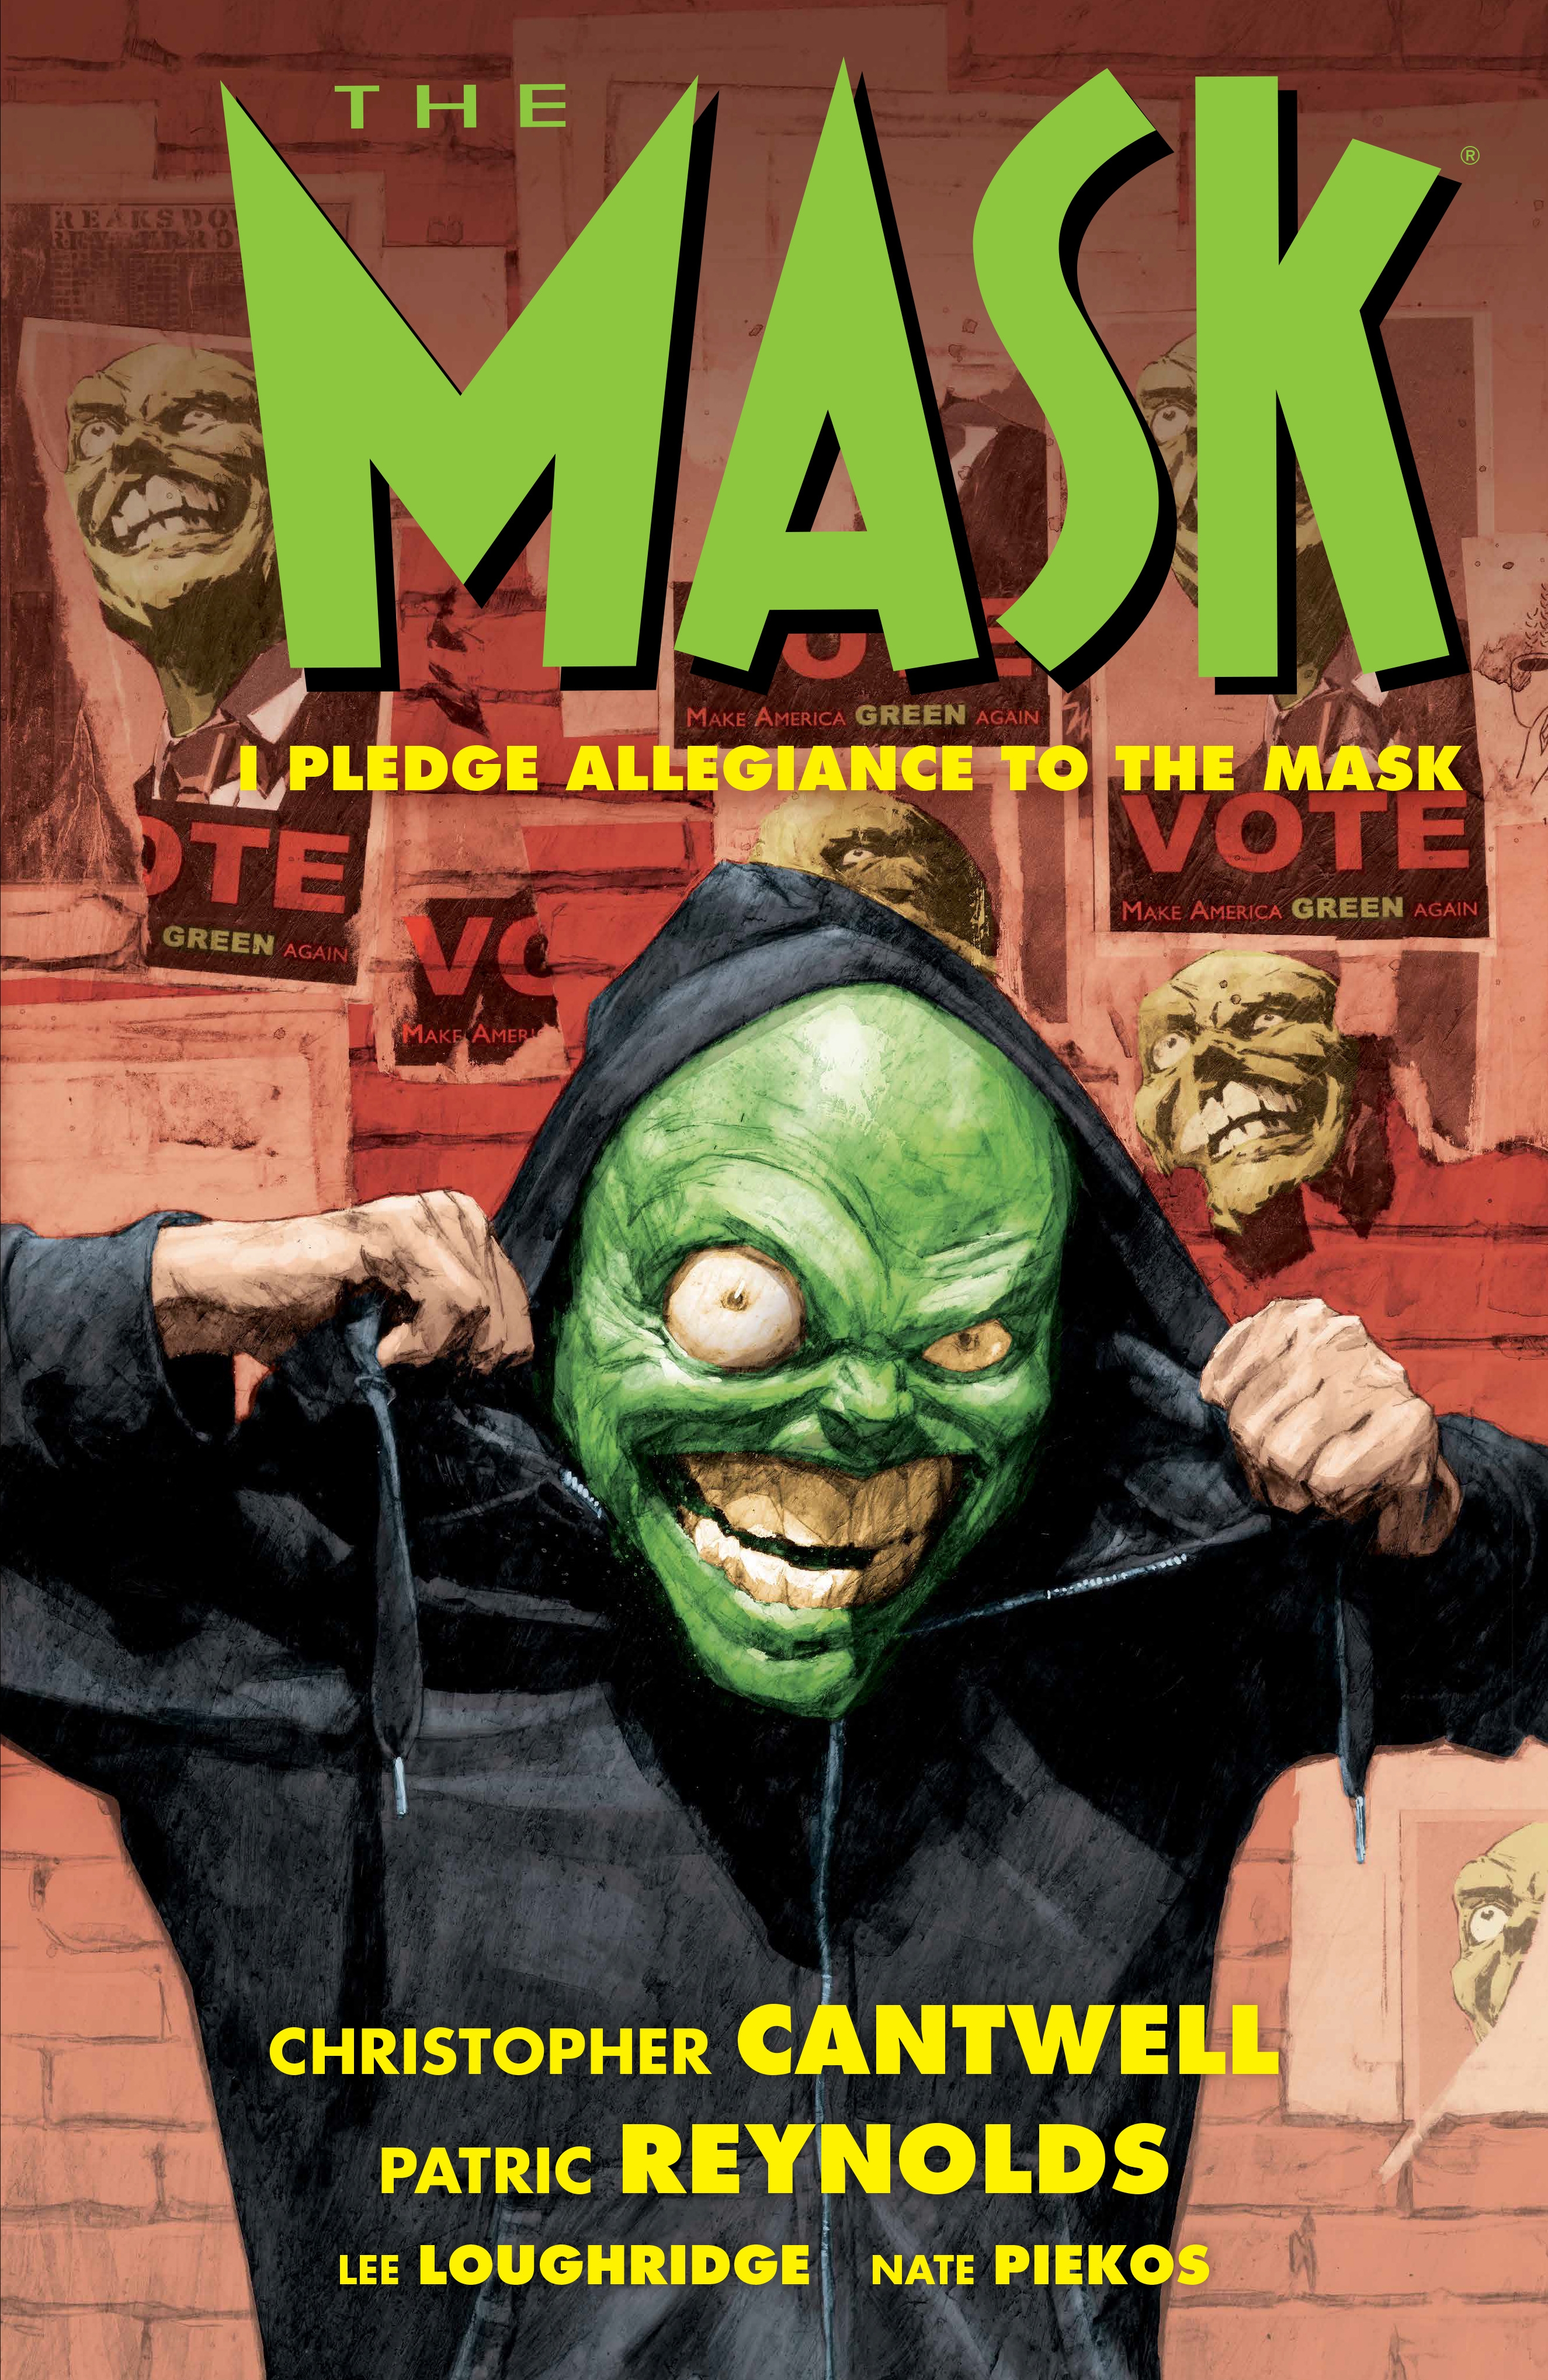 The Mask: I Pledge Allegiance to the Mask by CHRISTOPHER CANTWELL